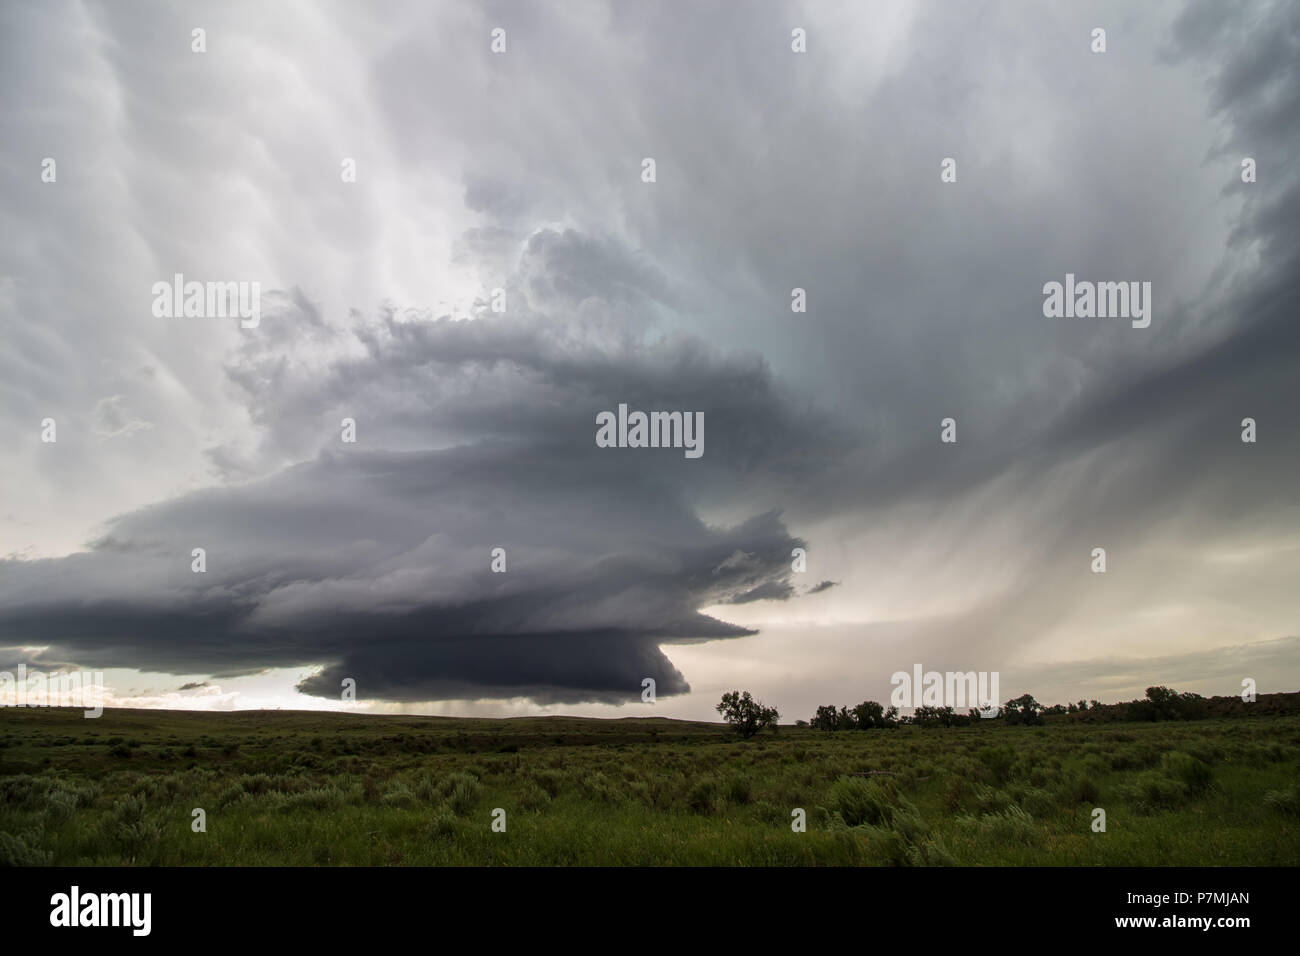 A supercell thunderstorm updraft spirals high into the sky of eastern Colorado in this eerie scene. Stock Photo